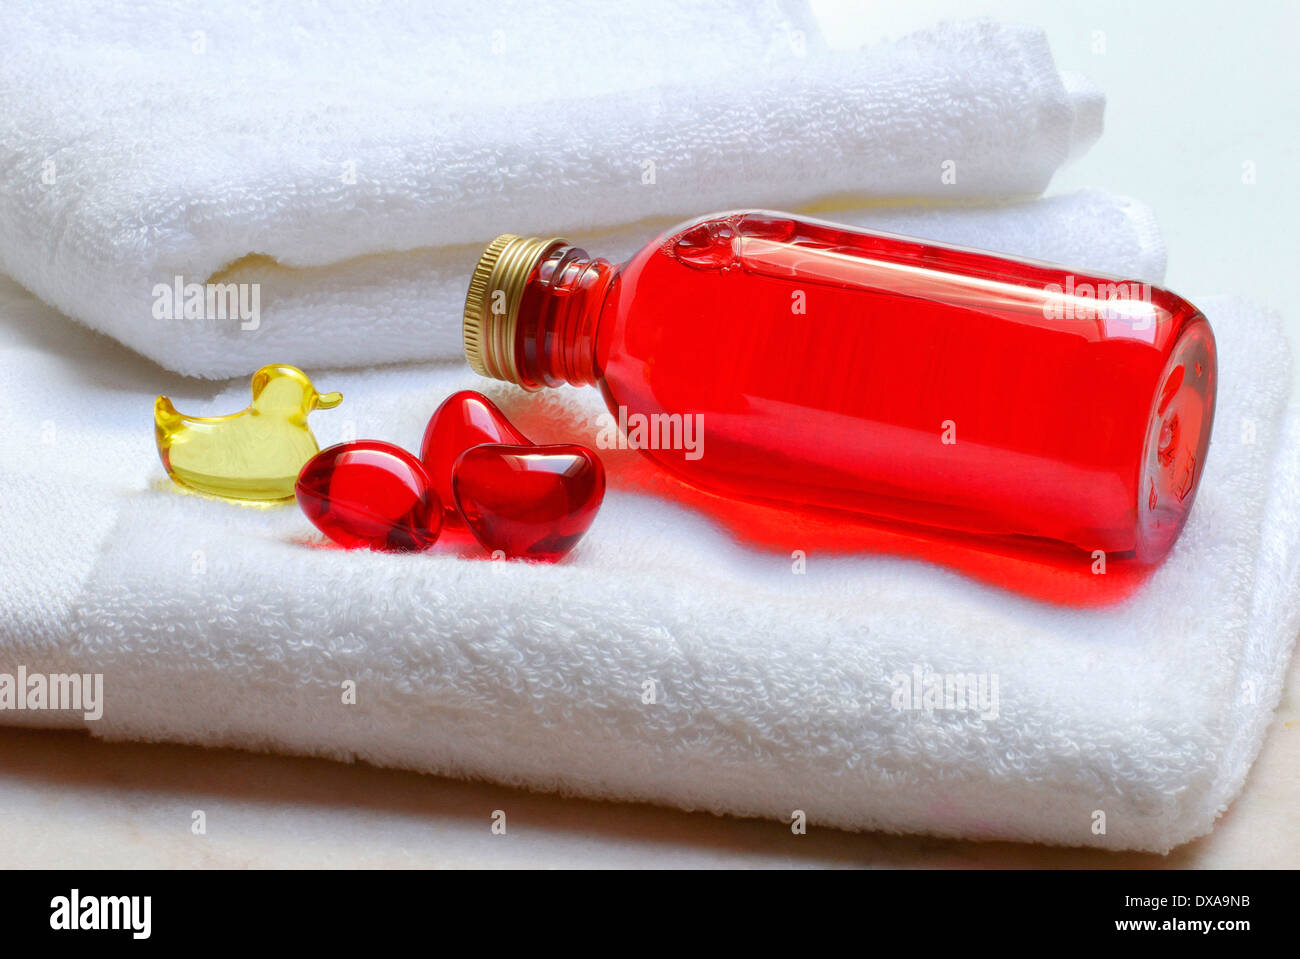 Soap and bath beads Stock Photo